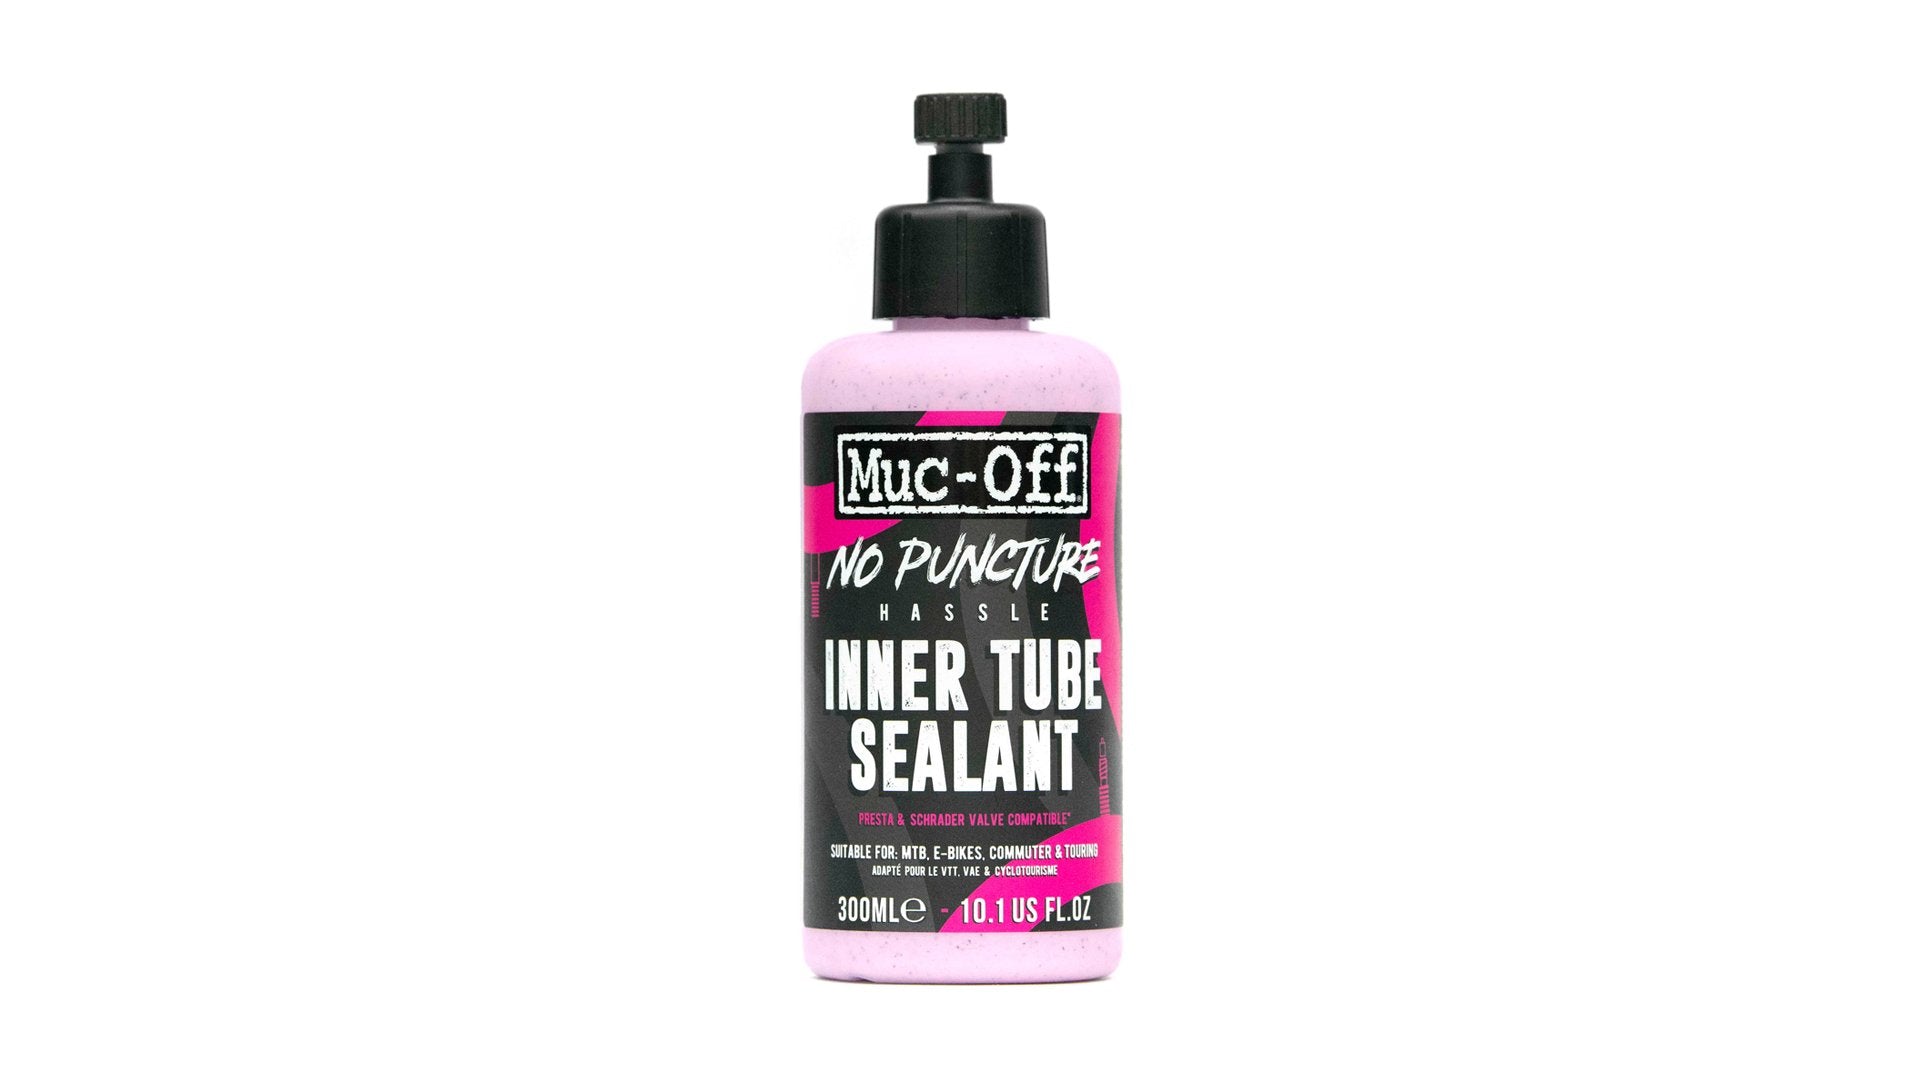 Muc Off No Puncture Hassle Tubeless Sealant - Advanced Bicycle Tyre Sealant  with UV Tracer Dye That Seals Tears and Holes Up to 6mm